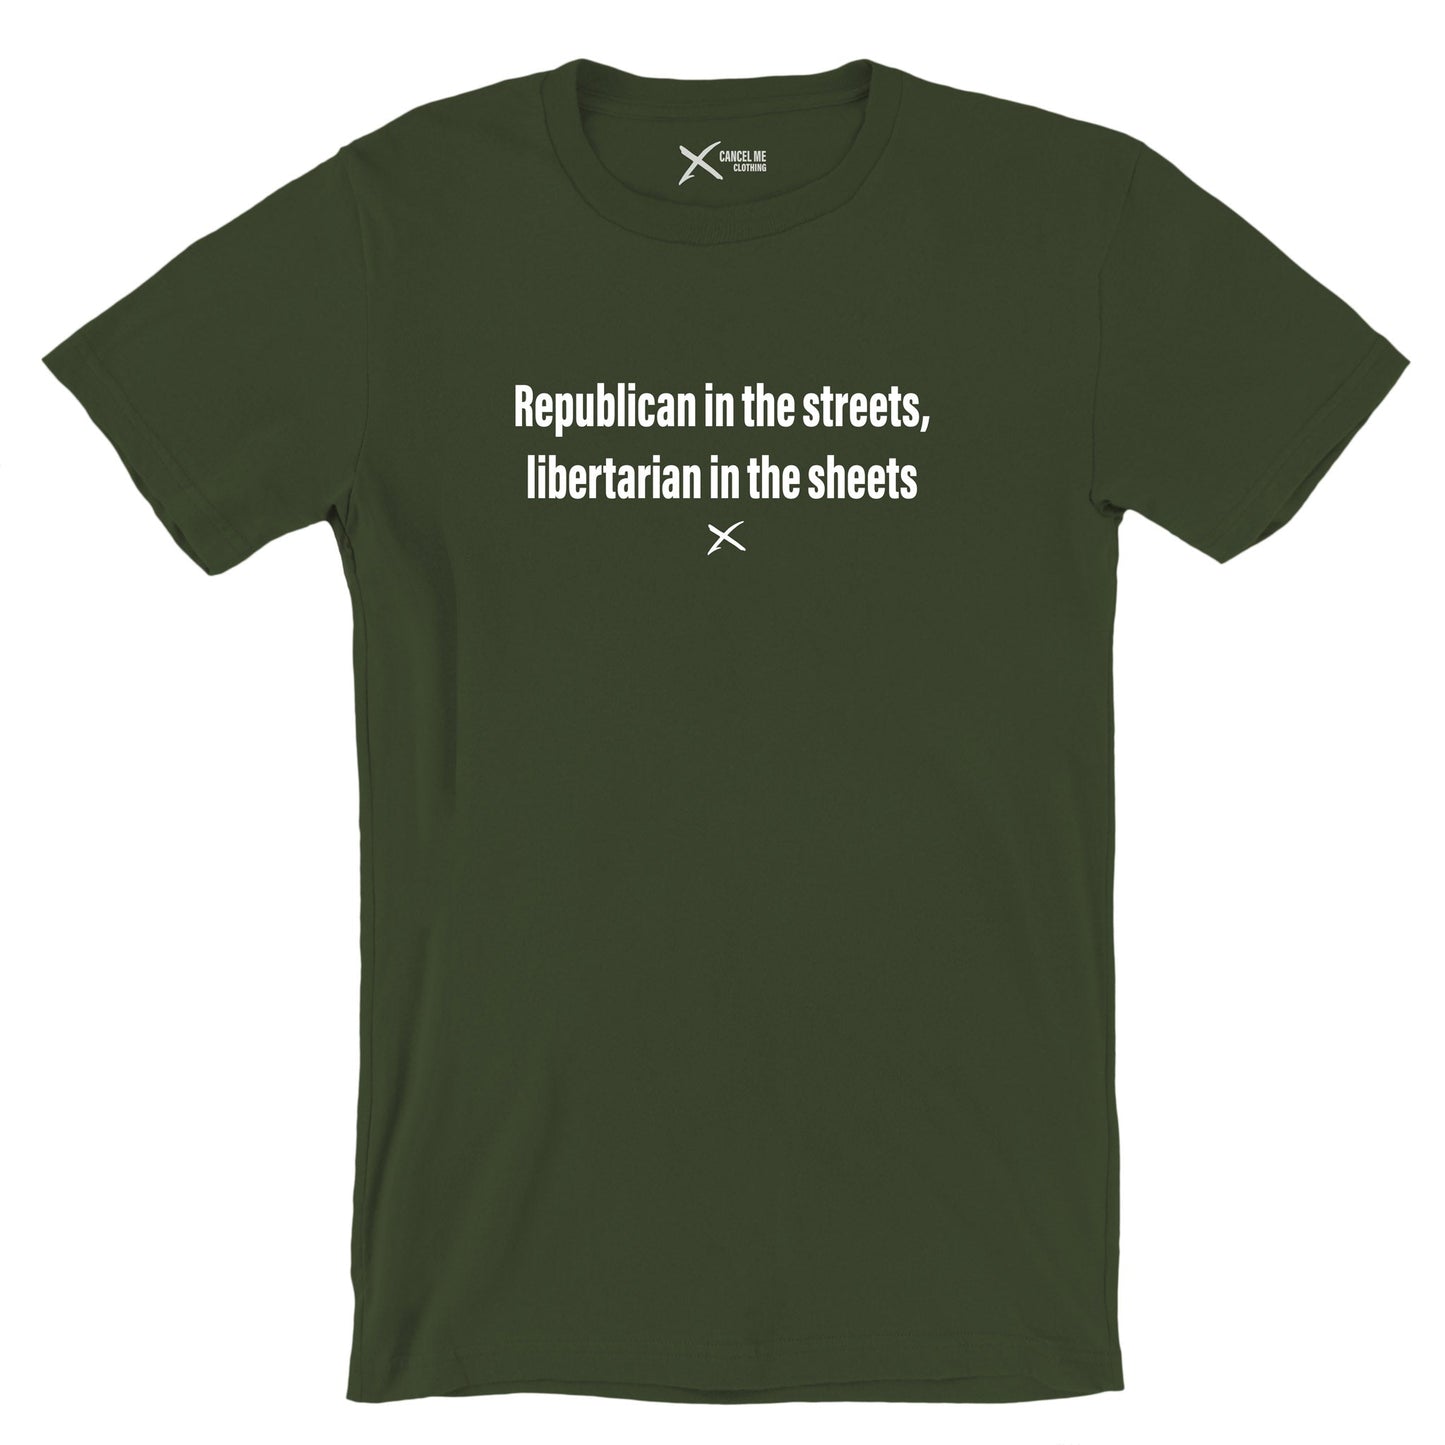 Republican in the streets, libertarian in the sheets - Shirt